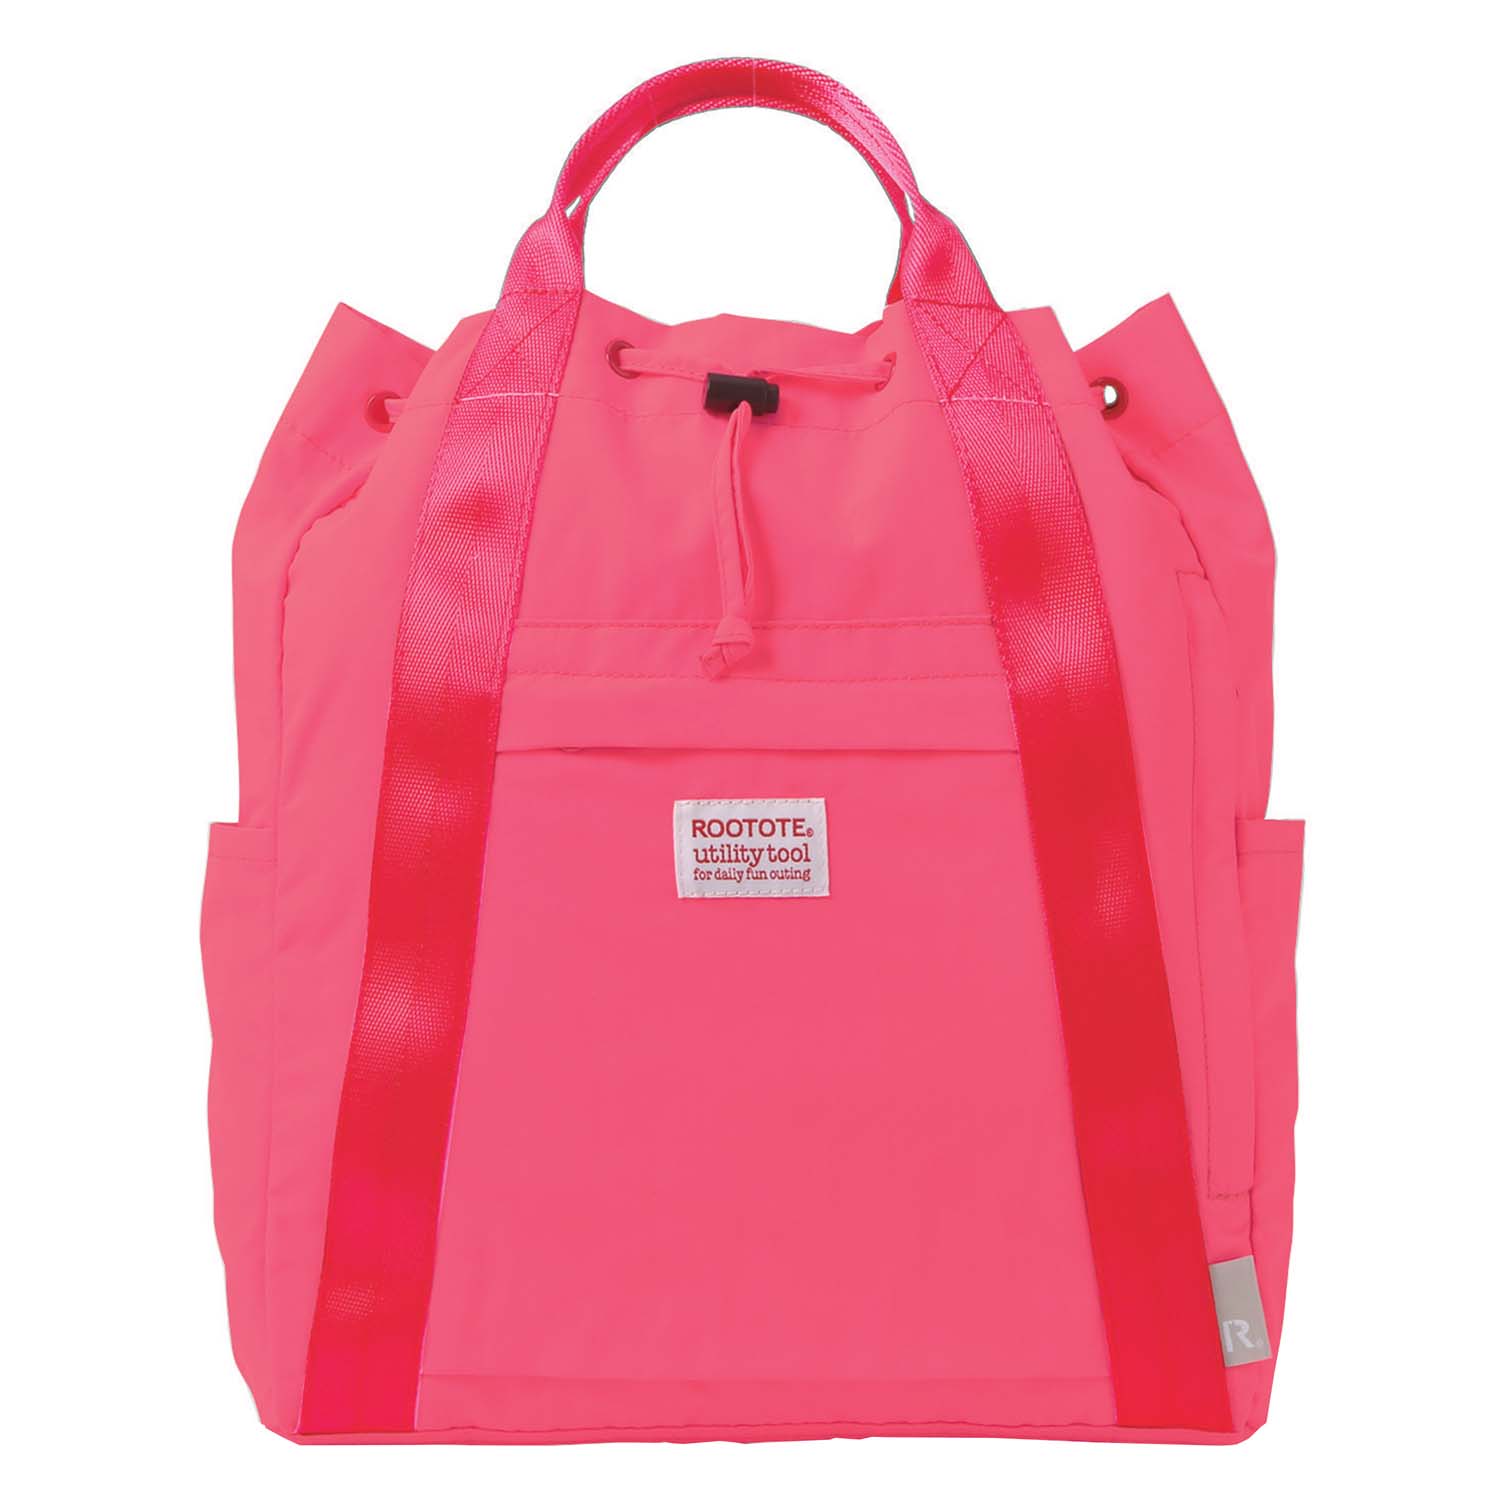 Ceoroo Tall Rootote 319406 Pink